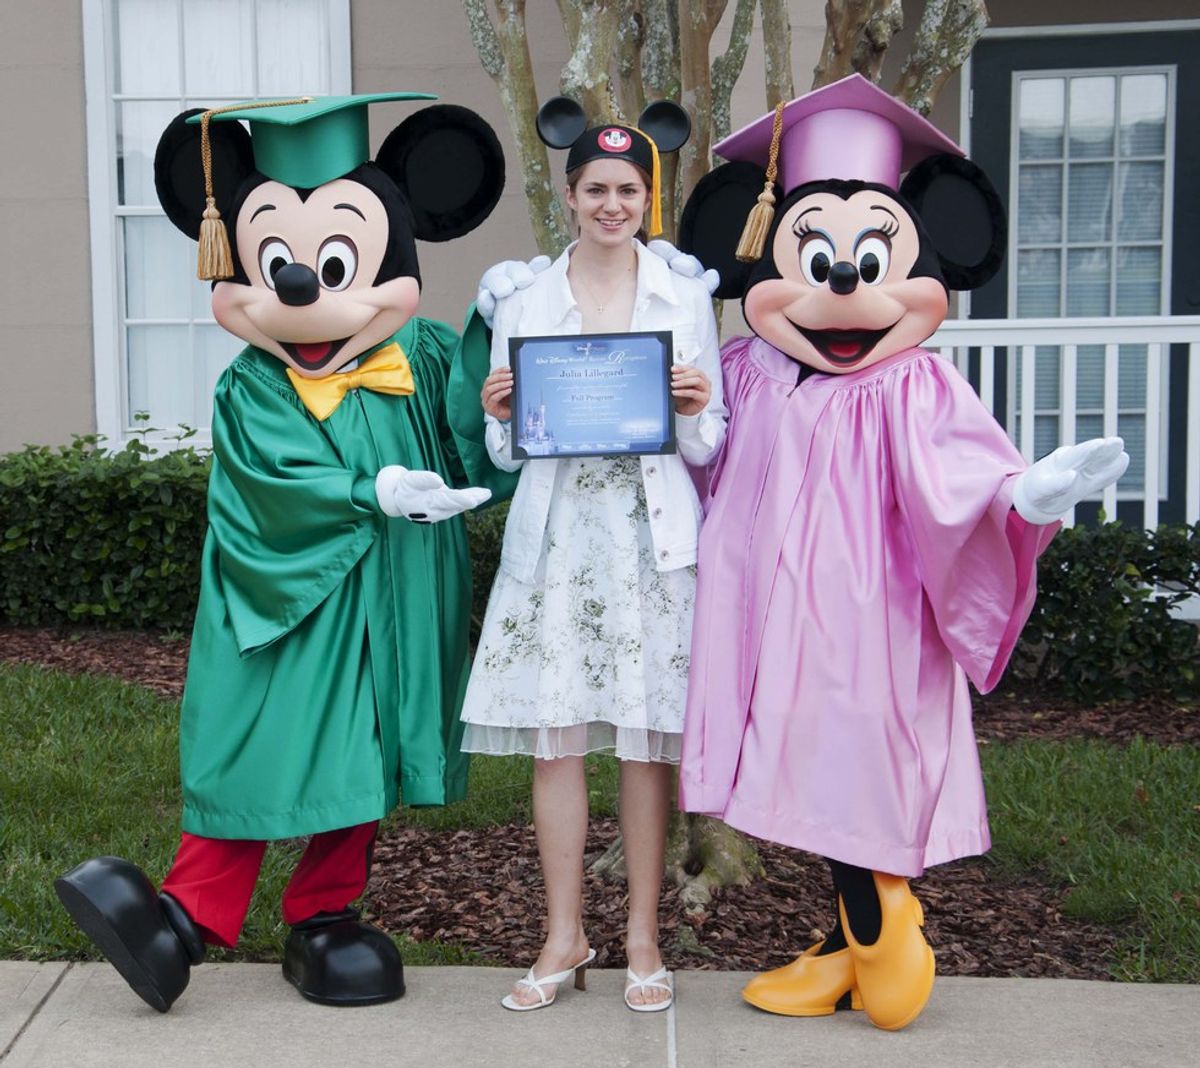 A California Student Majoring In Disney Could Be Changing College Forever